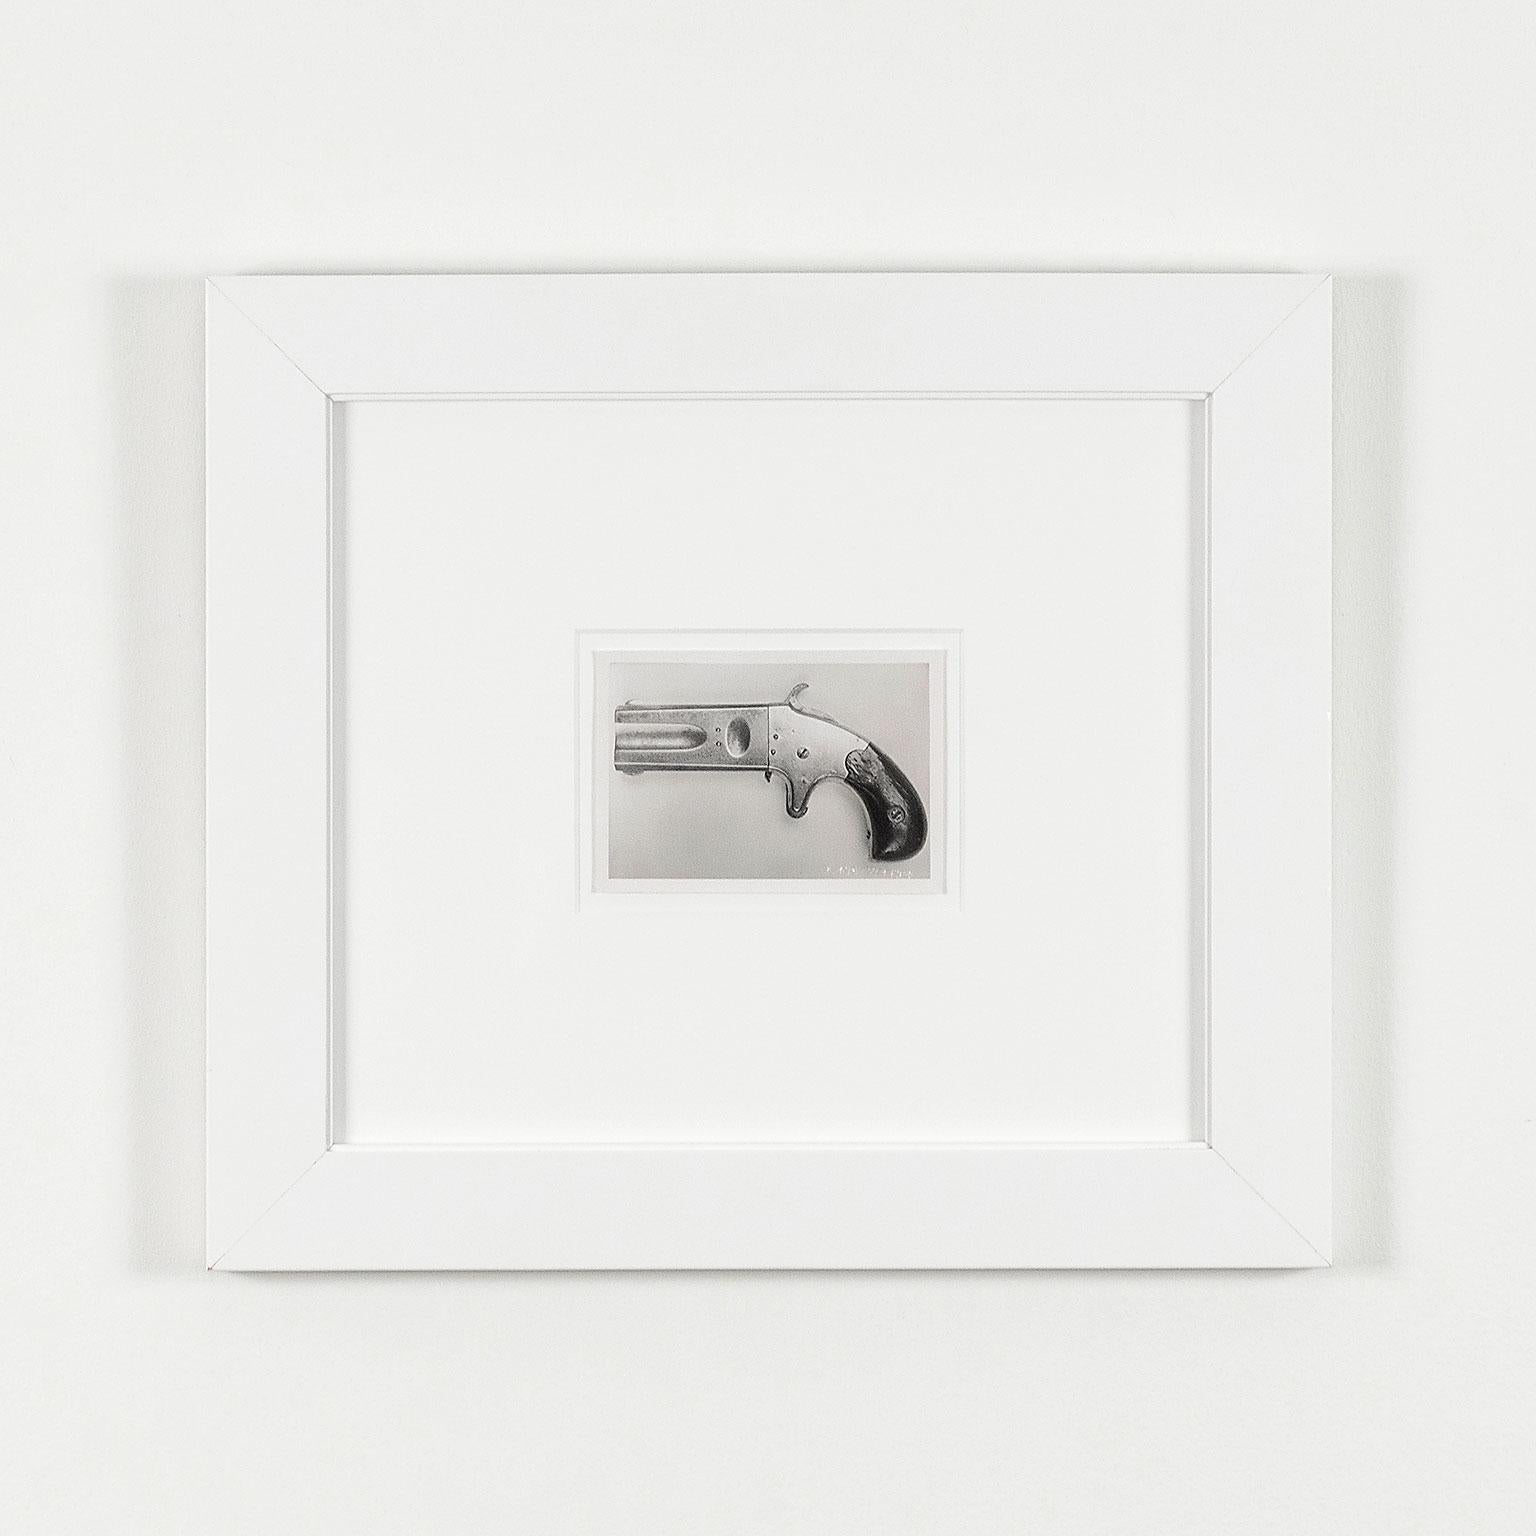 One Pistol  - American Modern Photograph by Andy Warhol